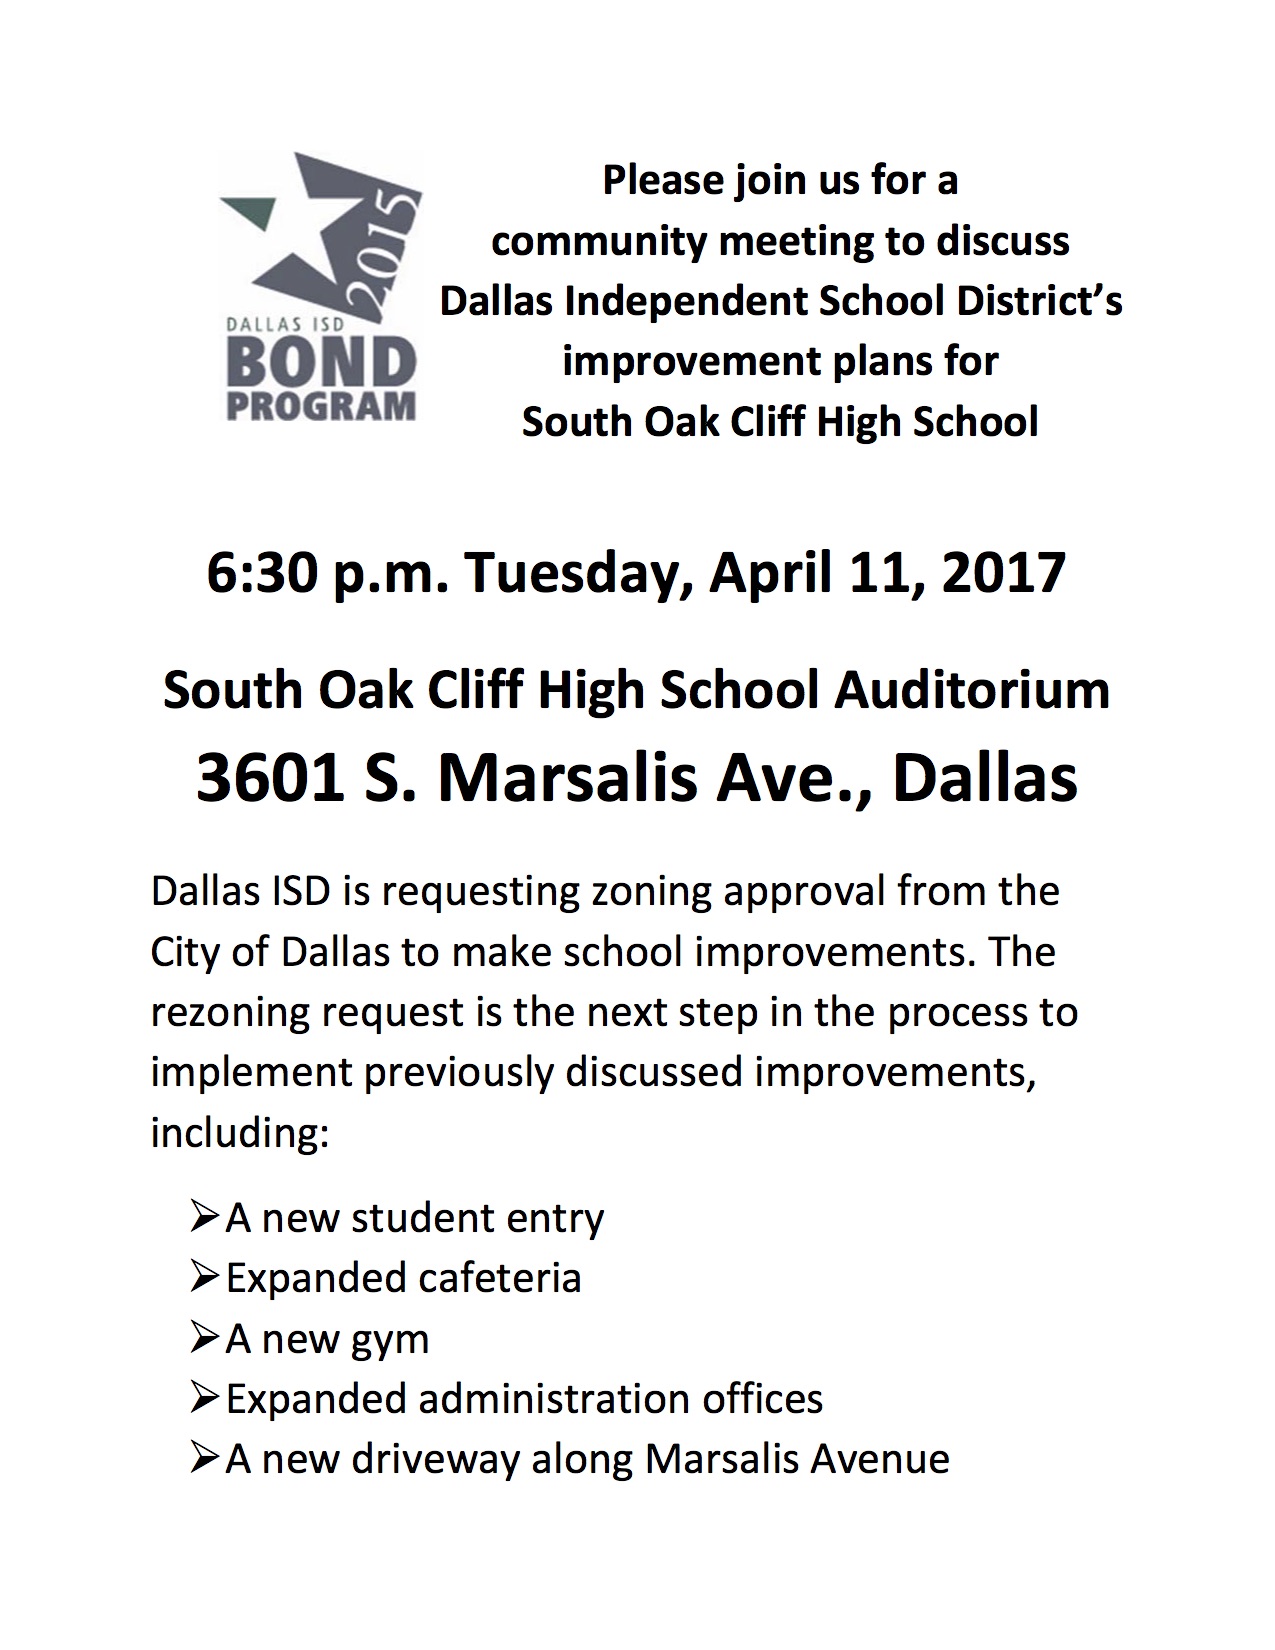 Community meeting to discuss proposed improvements at South Oak Cliff High School